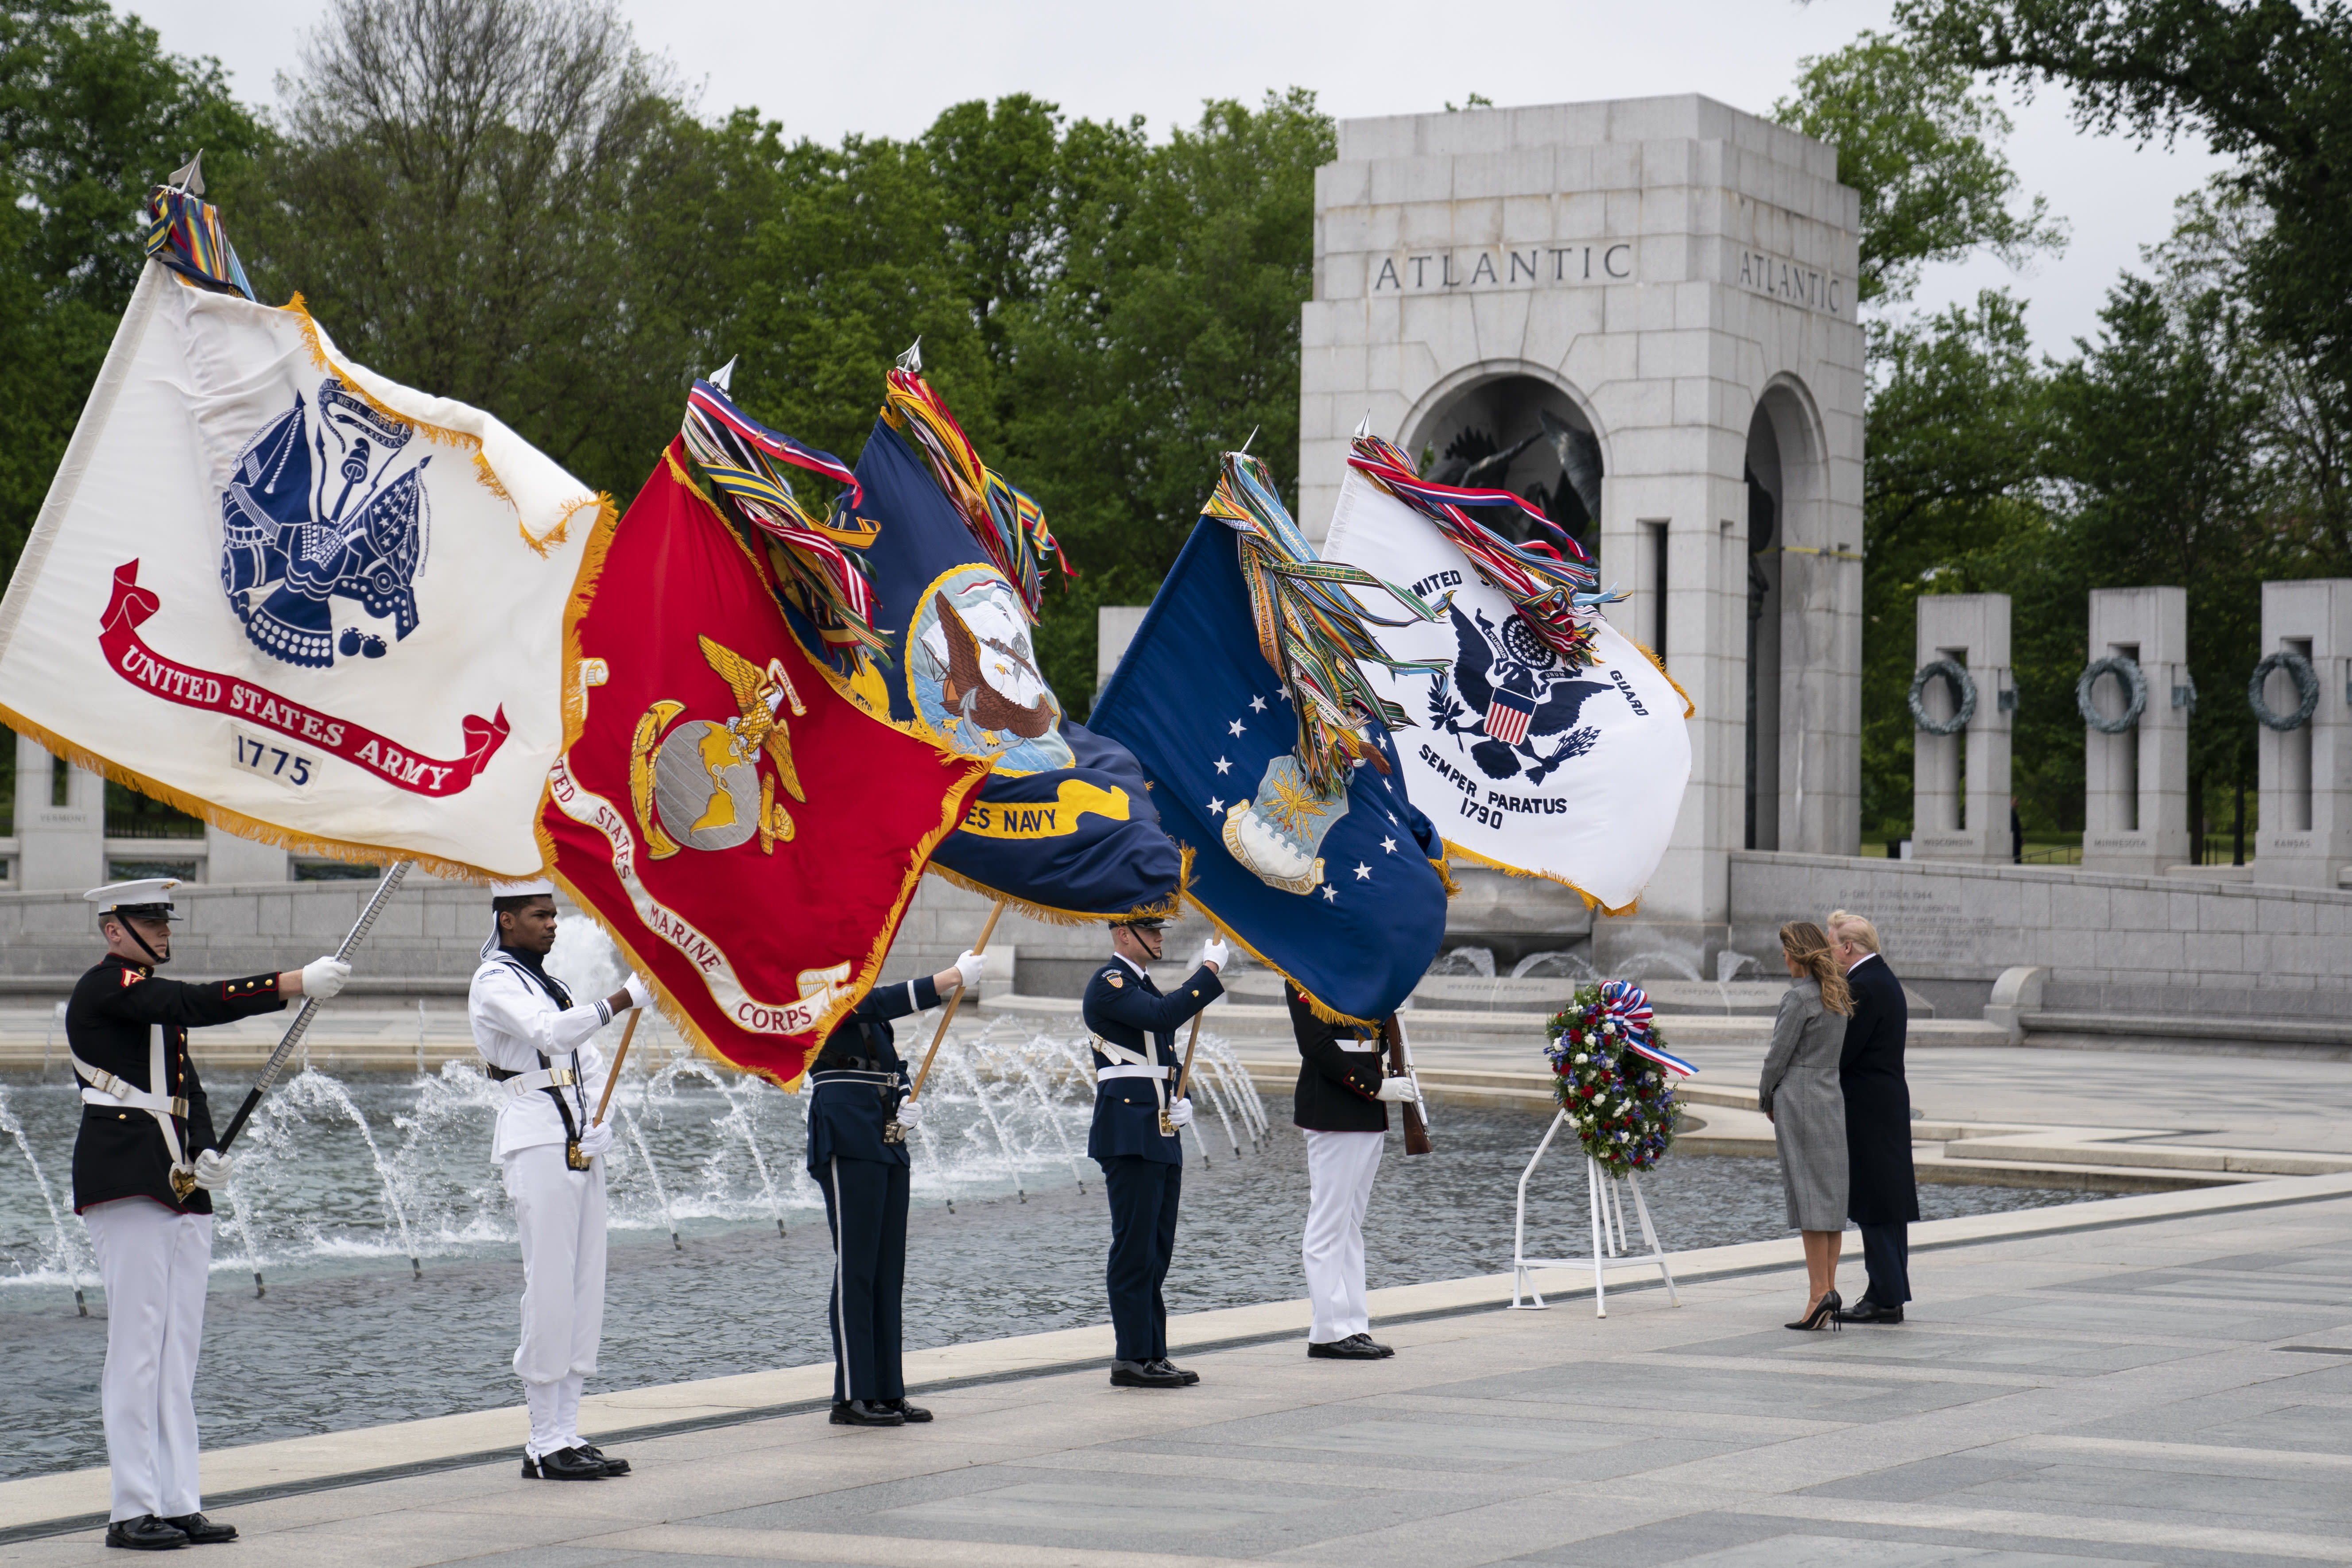 President Donald Trump and first lady Melania Trump participate in a wreath laying ceremony at the World War II Memorial to commemorate the 75th anniversary of Victory in Europe Day, Friday, May 8, 2020, in Washington. (AP Photo/Evan Vucci)